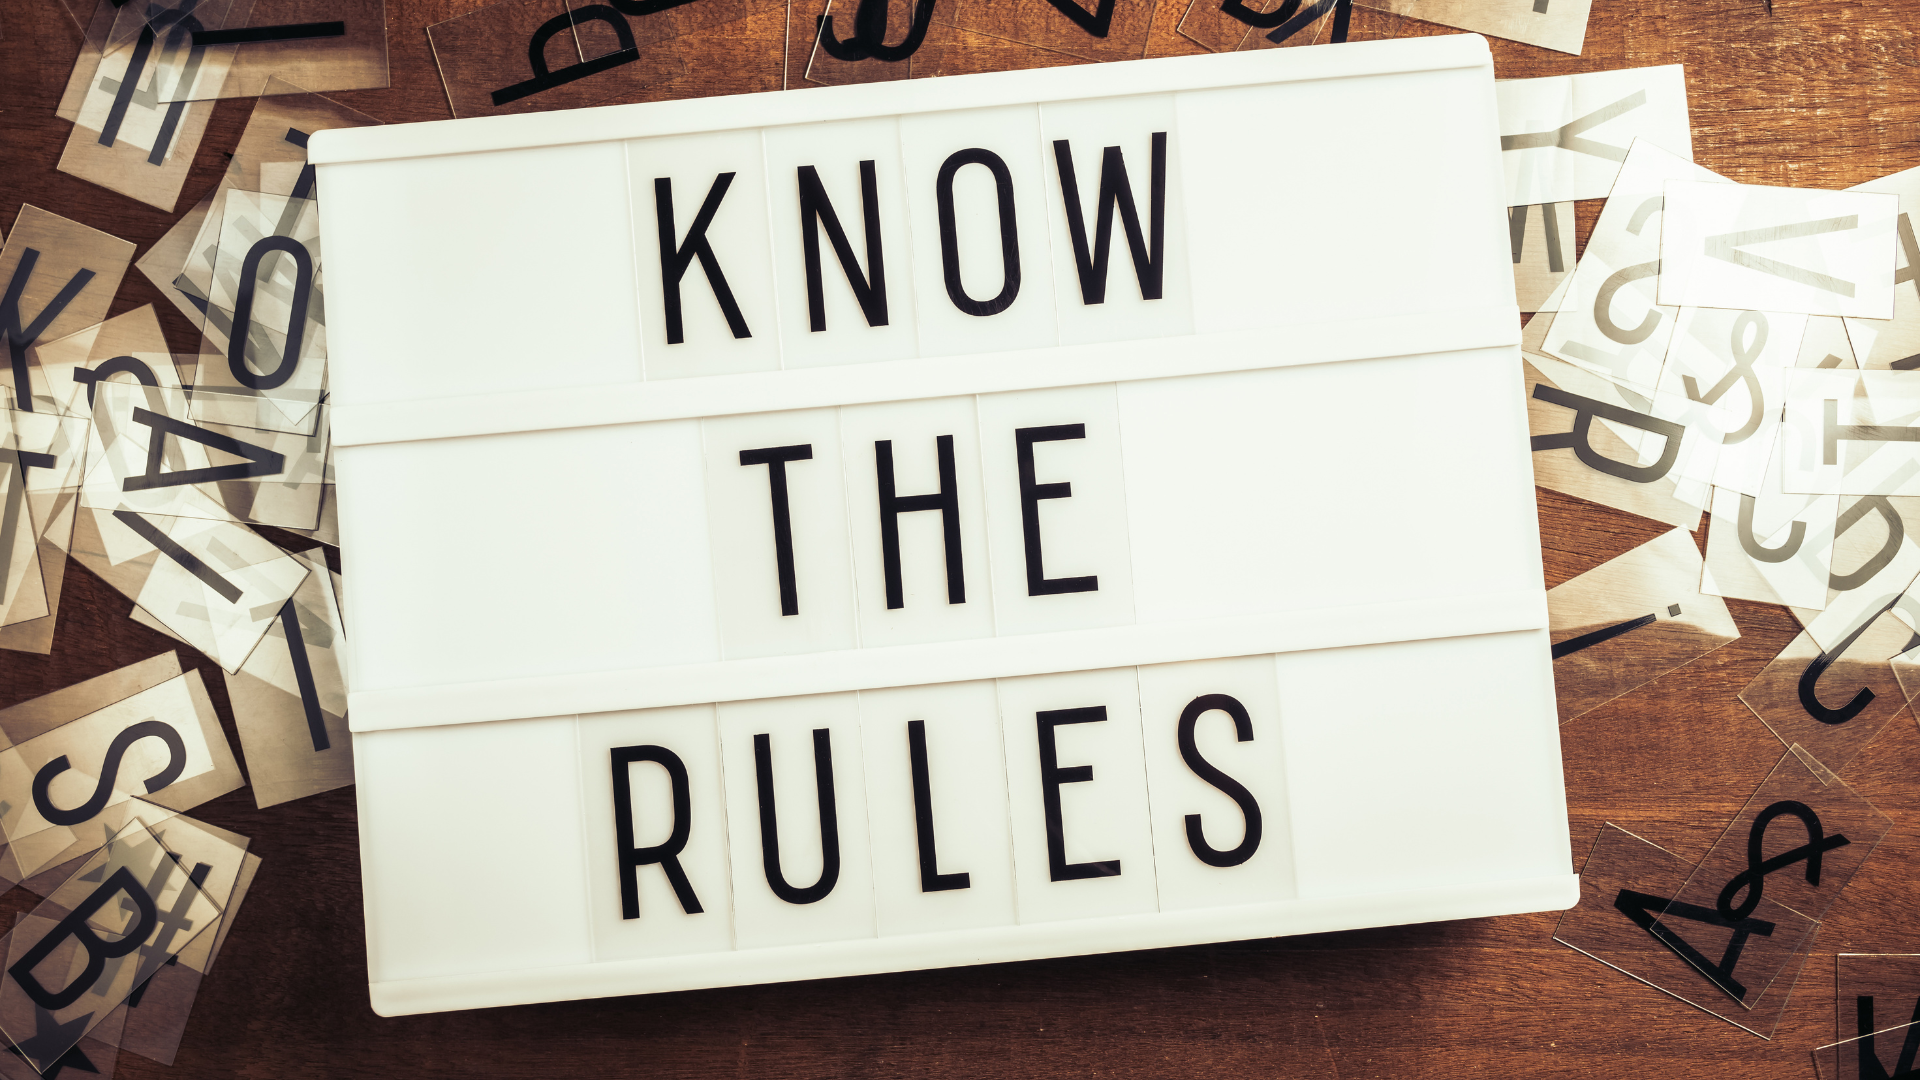 Real Estate Rule of Three?